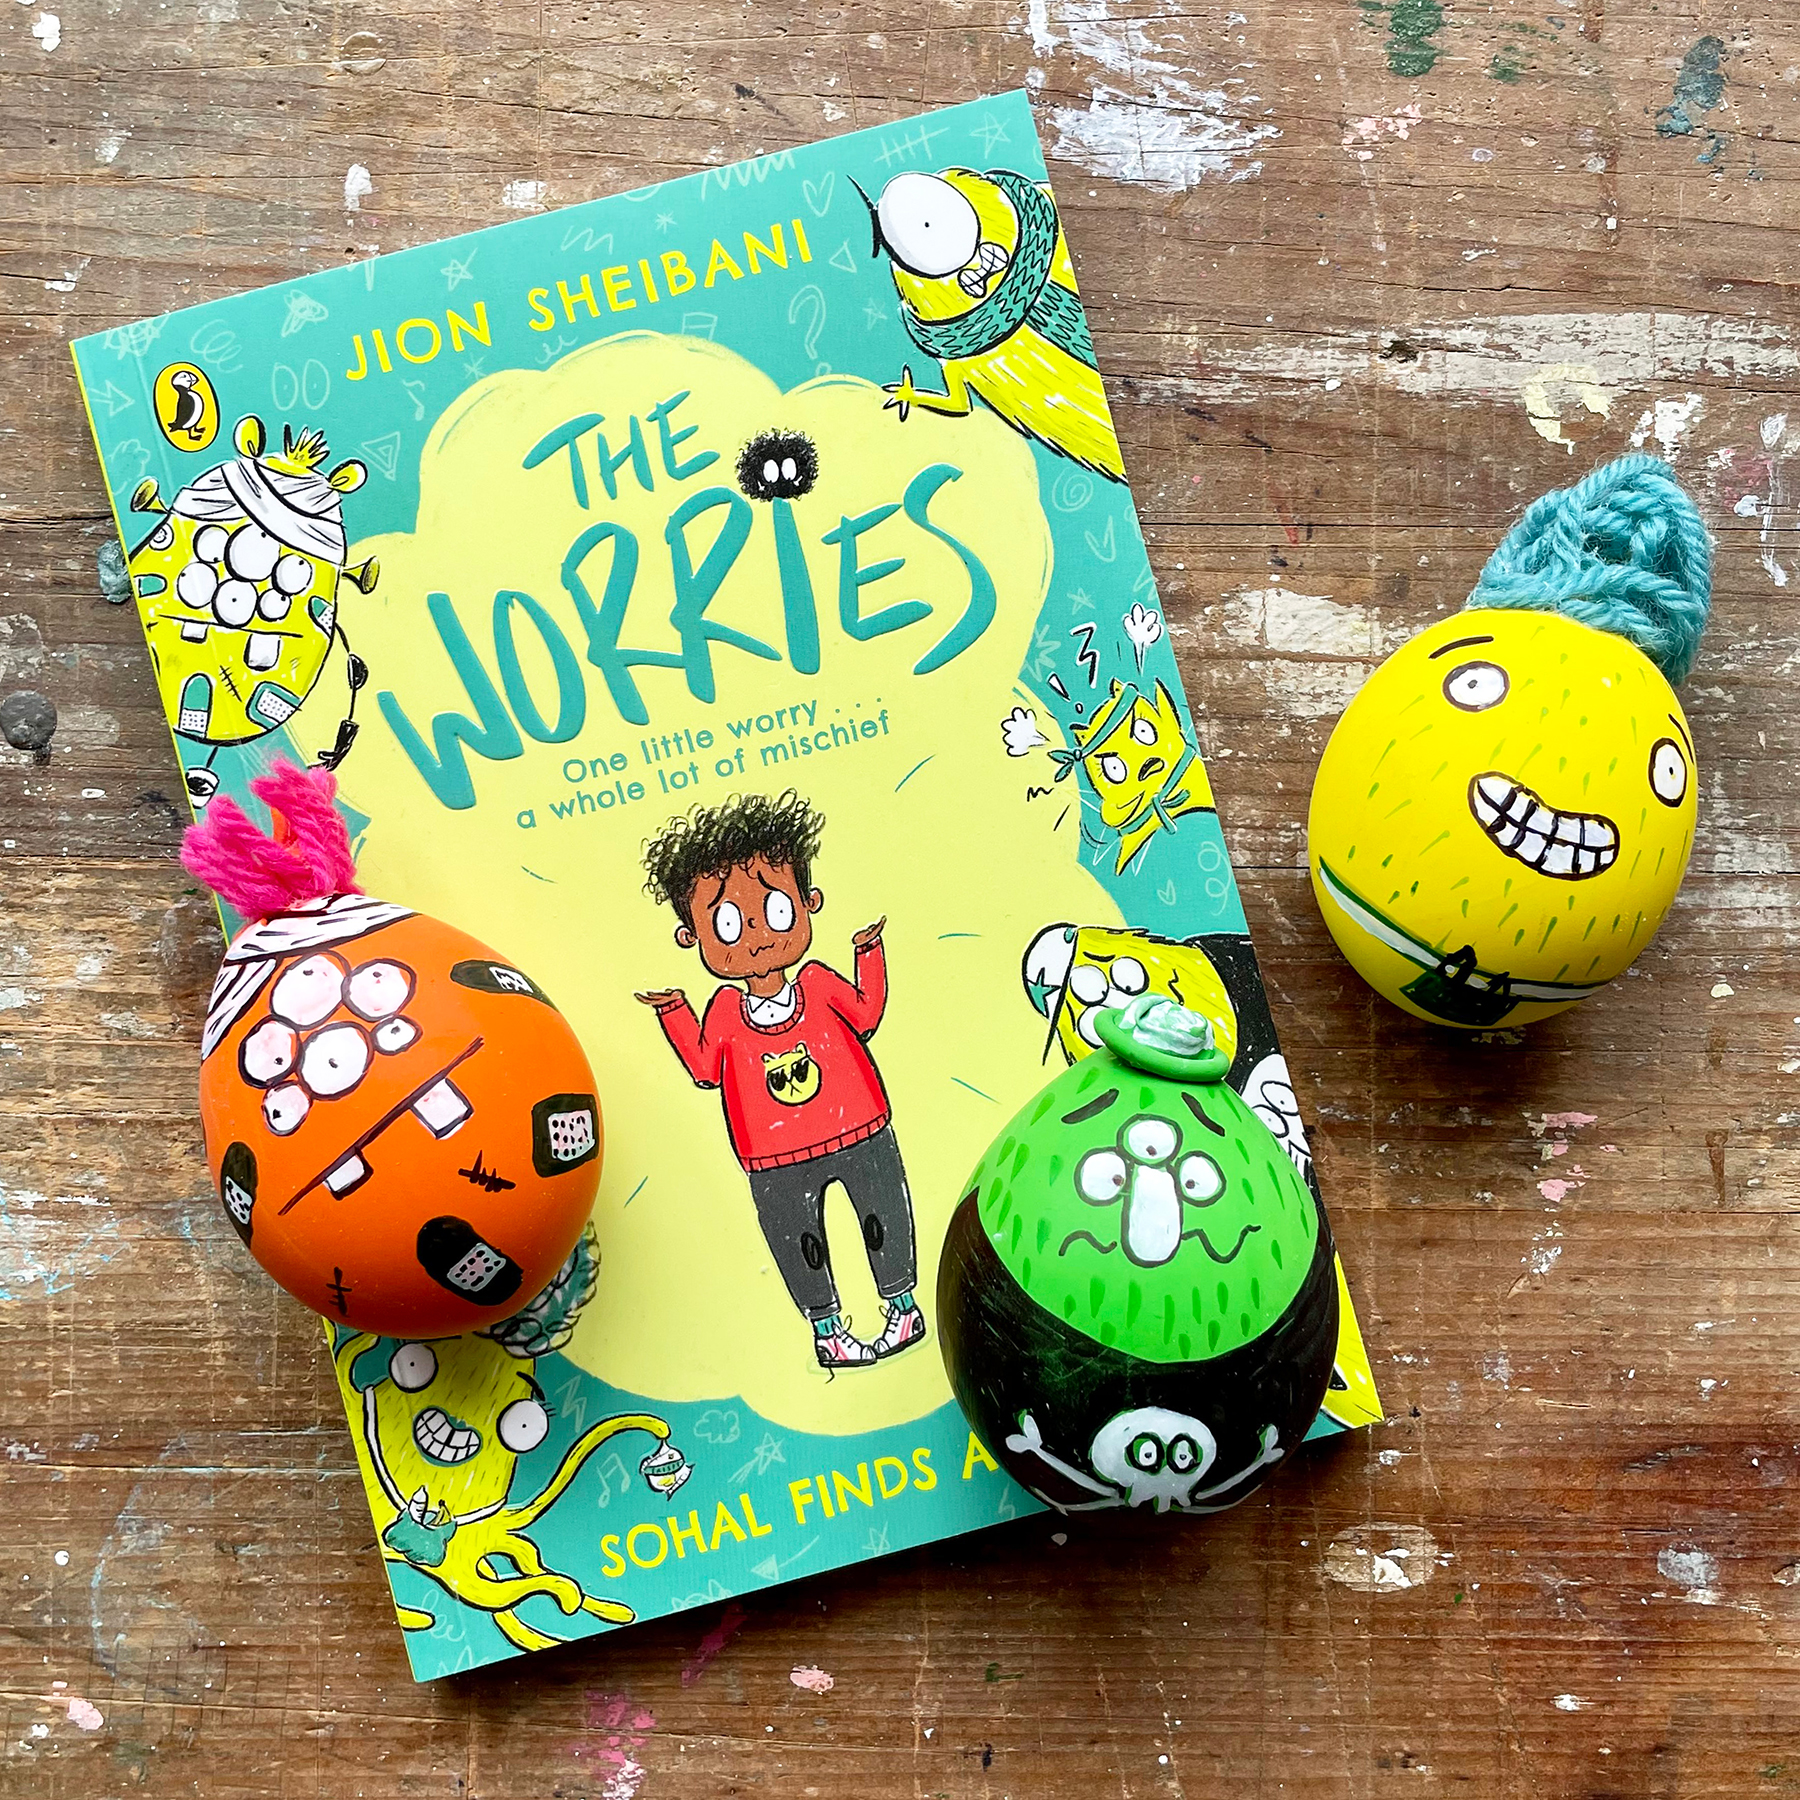 A photo of the final result, three funny face stress balls, one green, one yellow and one orange next to the book The Worries by Jion Sheibani